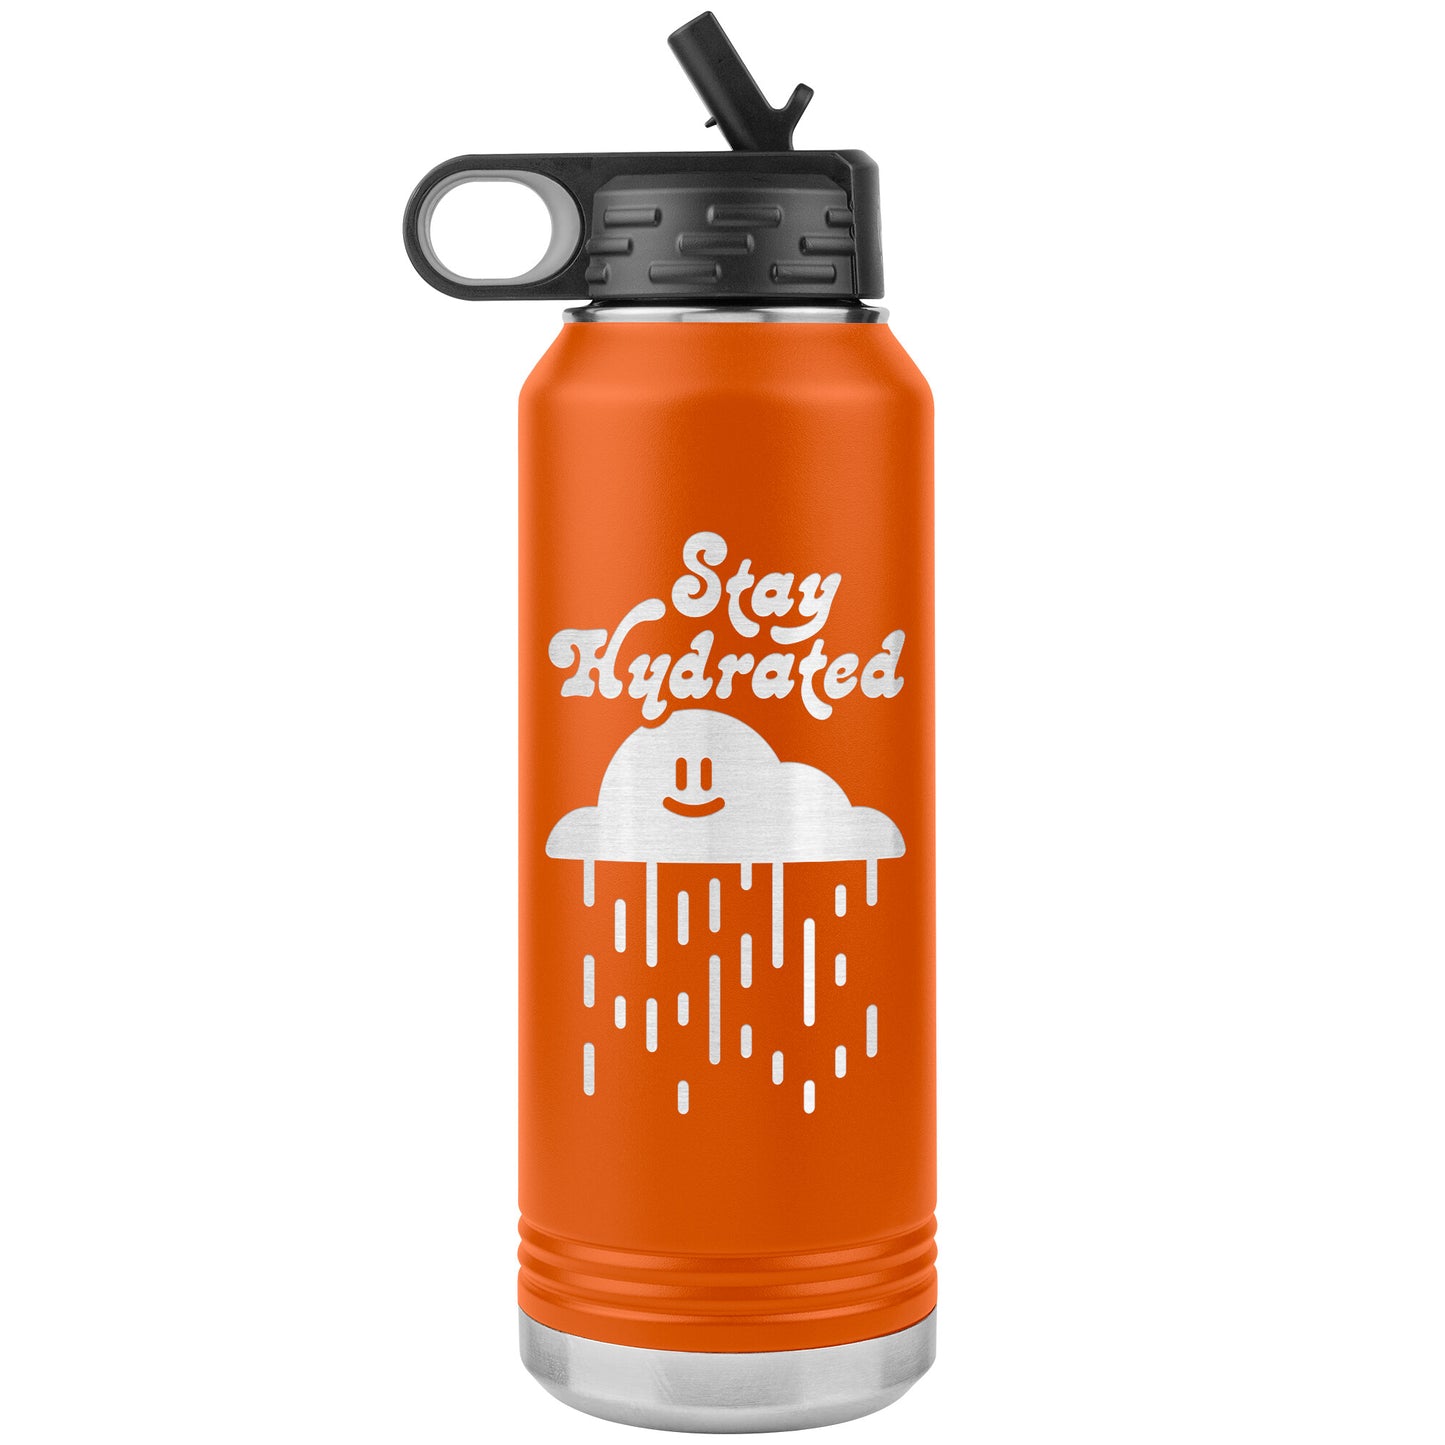 Stay Hydrated 03 - 32oz Insulated Water Bottle